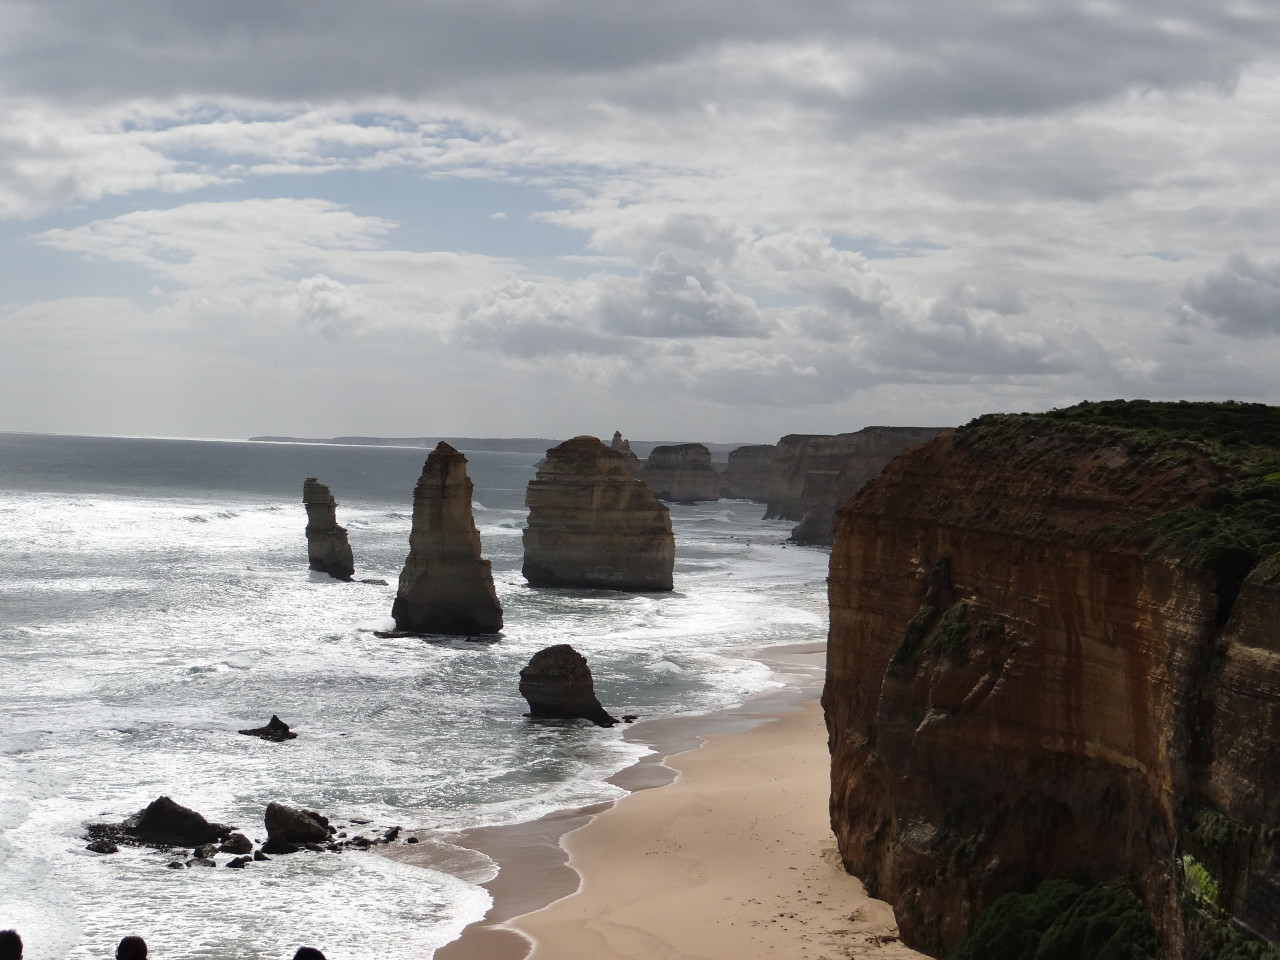 Iconic Twelve Apostles rock formations along The Great Ocean Road